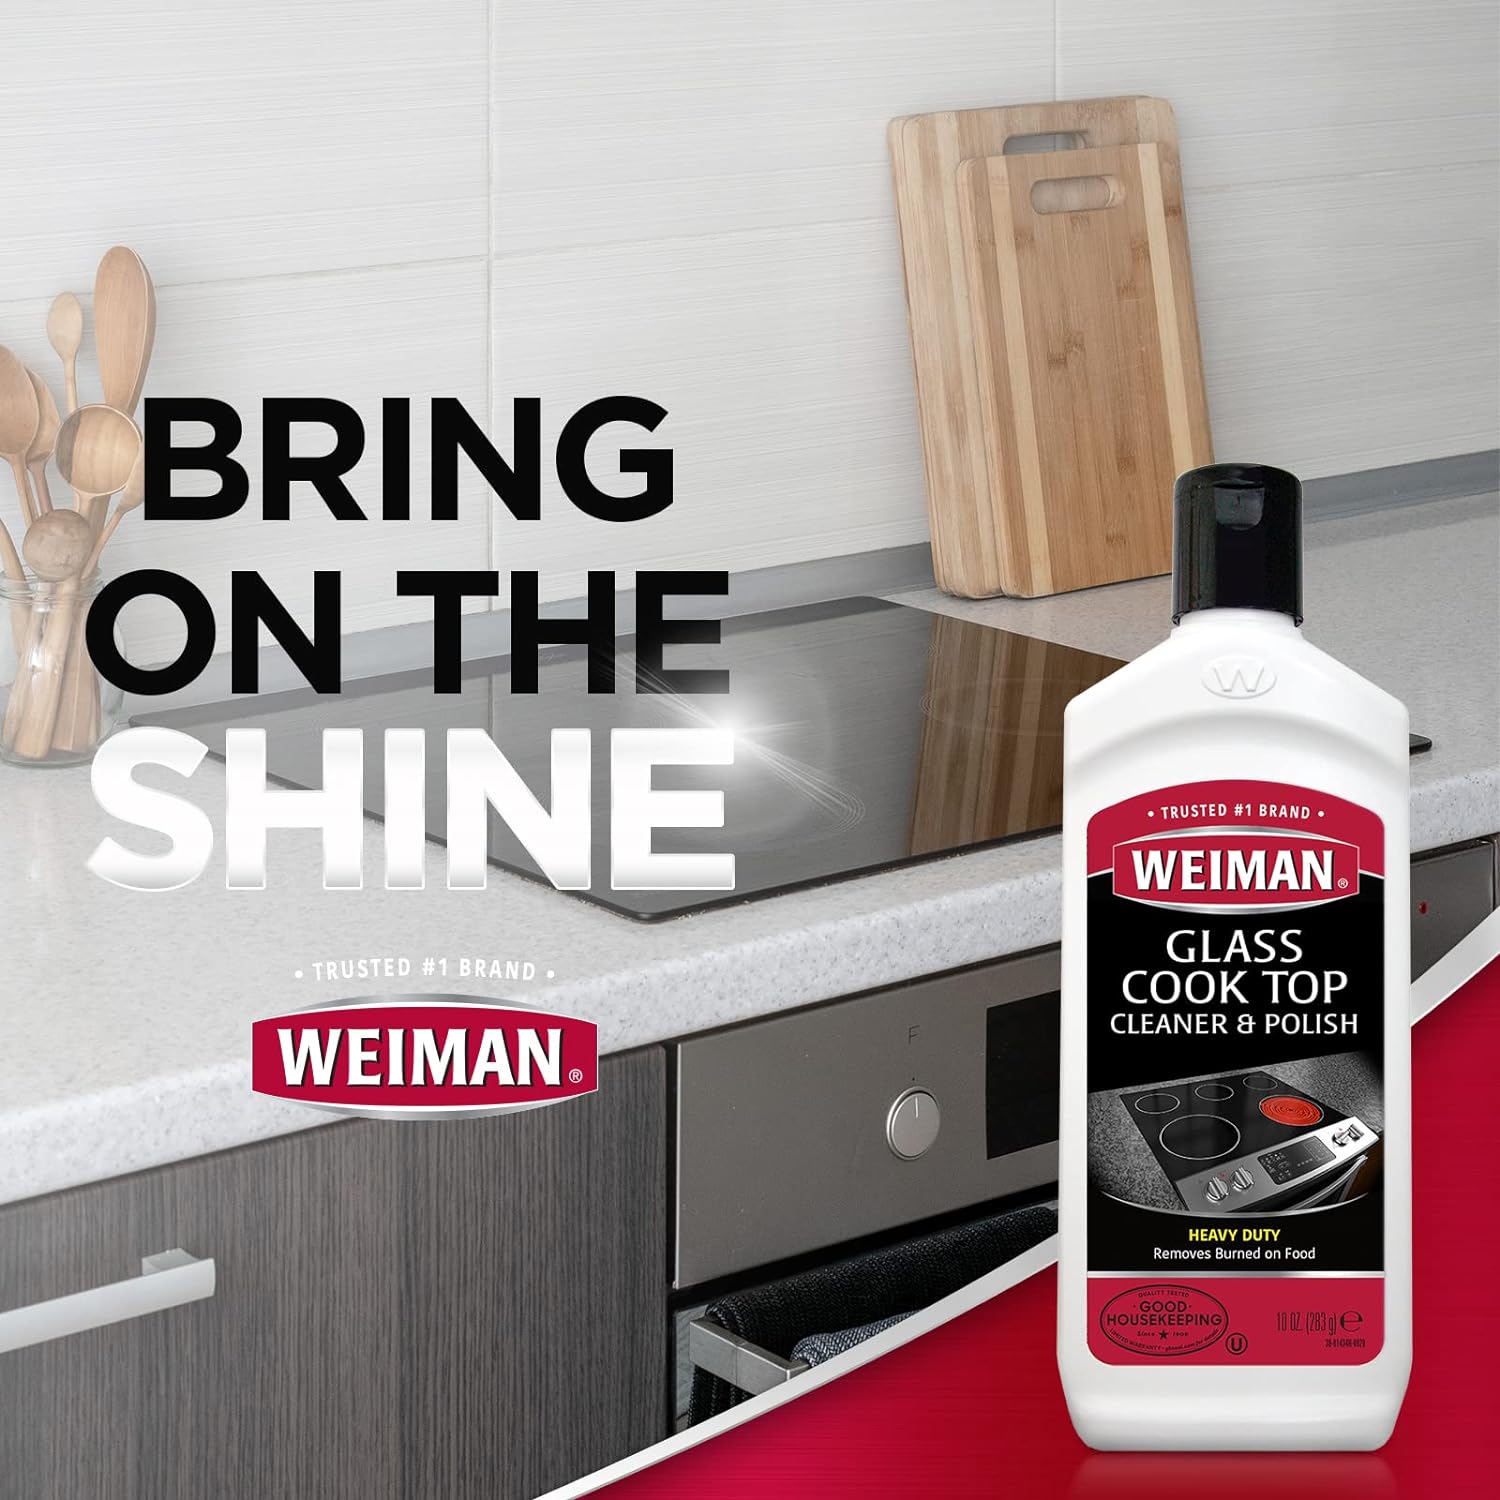 Weiman Ceramic and Glass Cooktop Cleaner - Heavy Duty Cleaner and Polish (10 Ounce Bottle and 3 Scrubbing Pads) : Health & Household